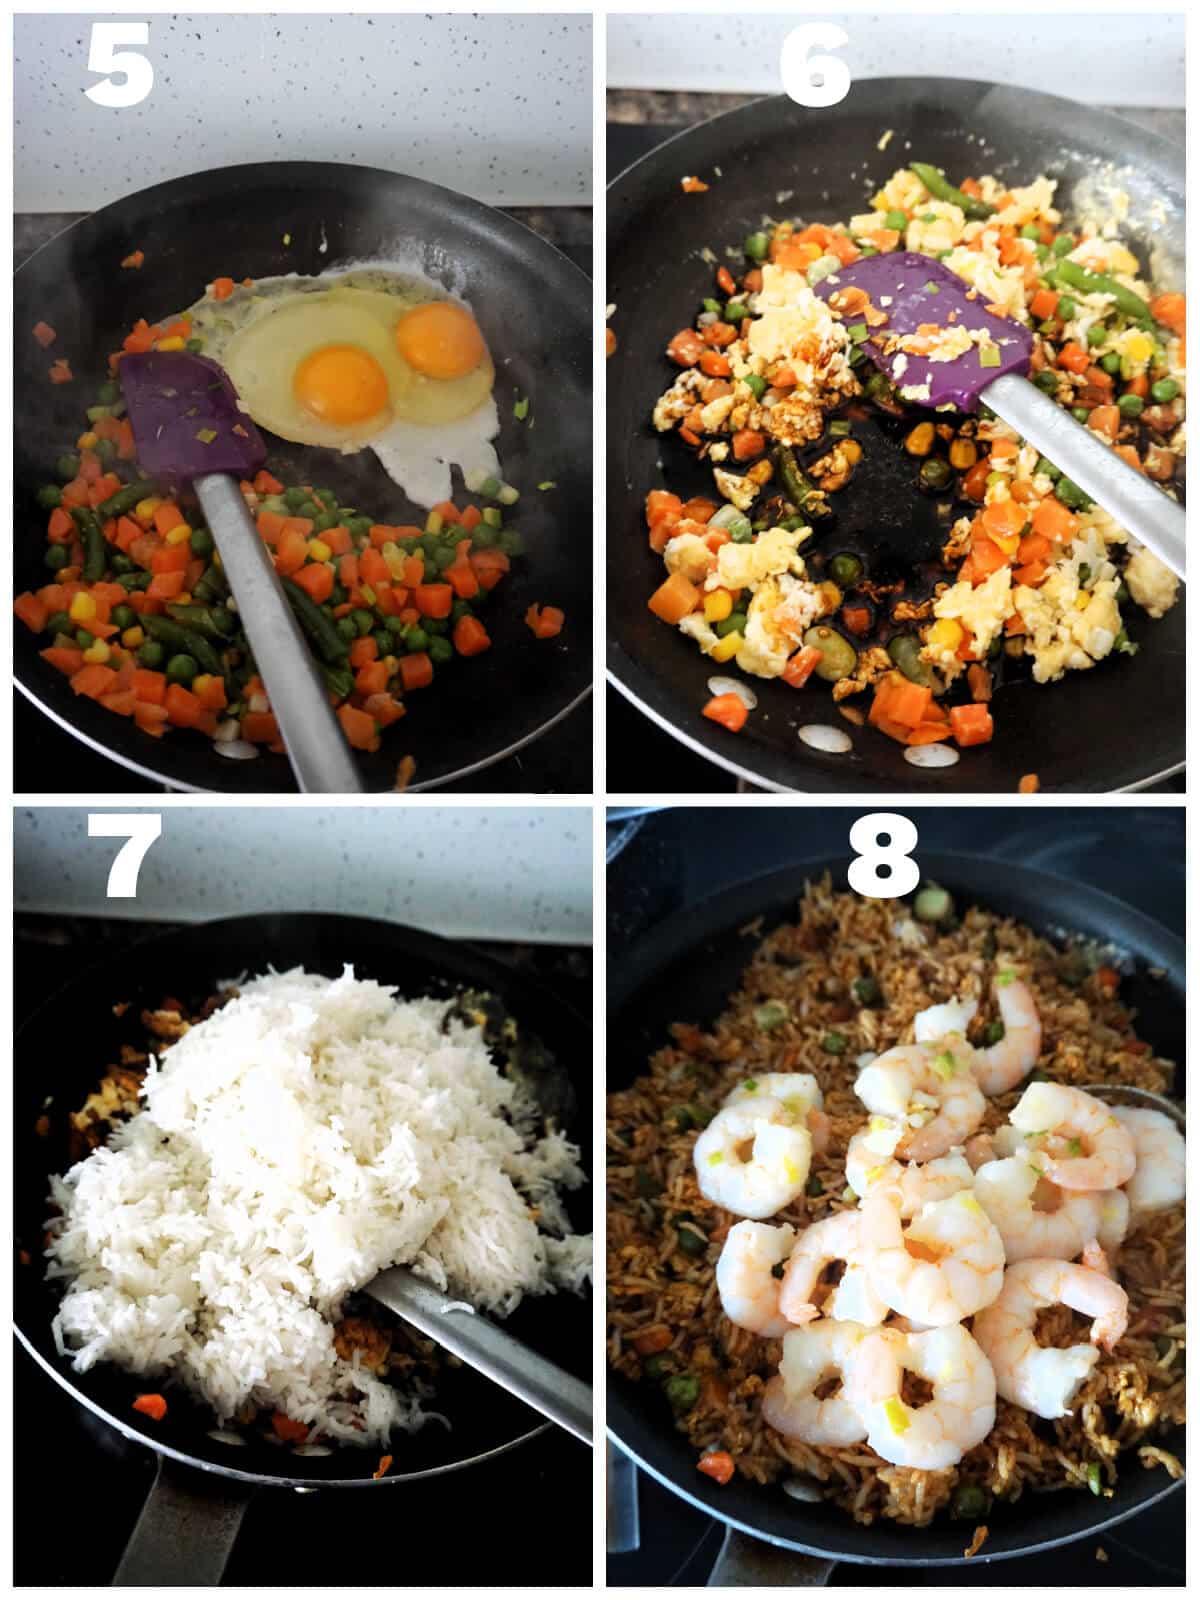 Collage of 4 photos to show how to make prawn egg fried rice.